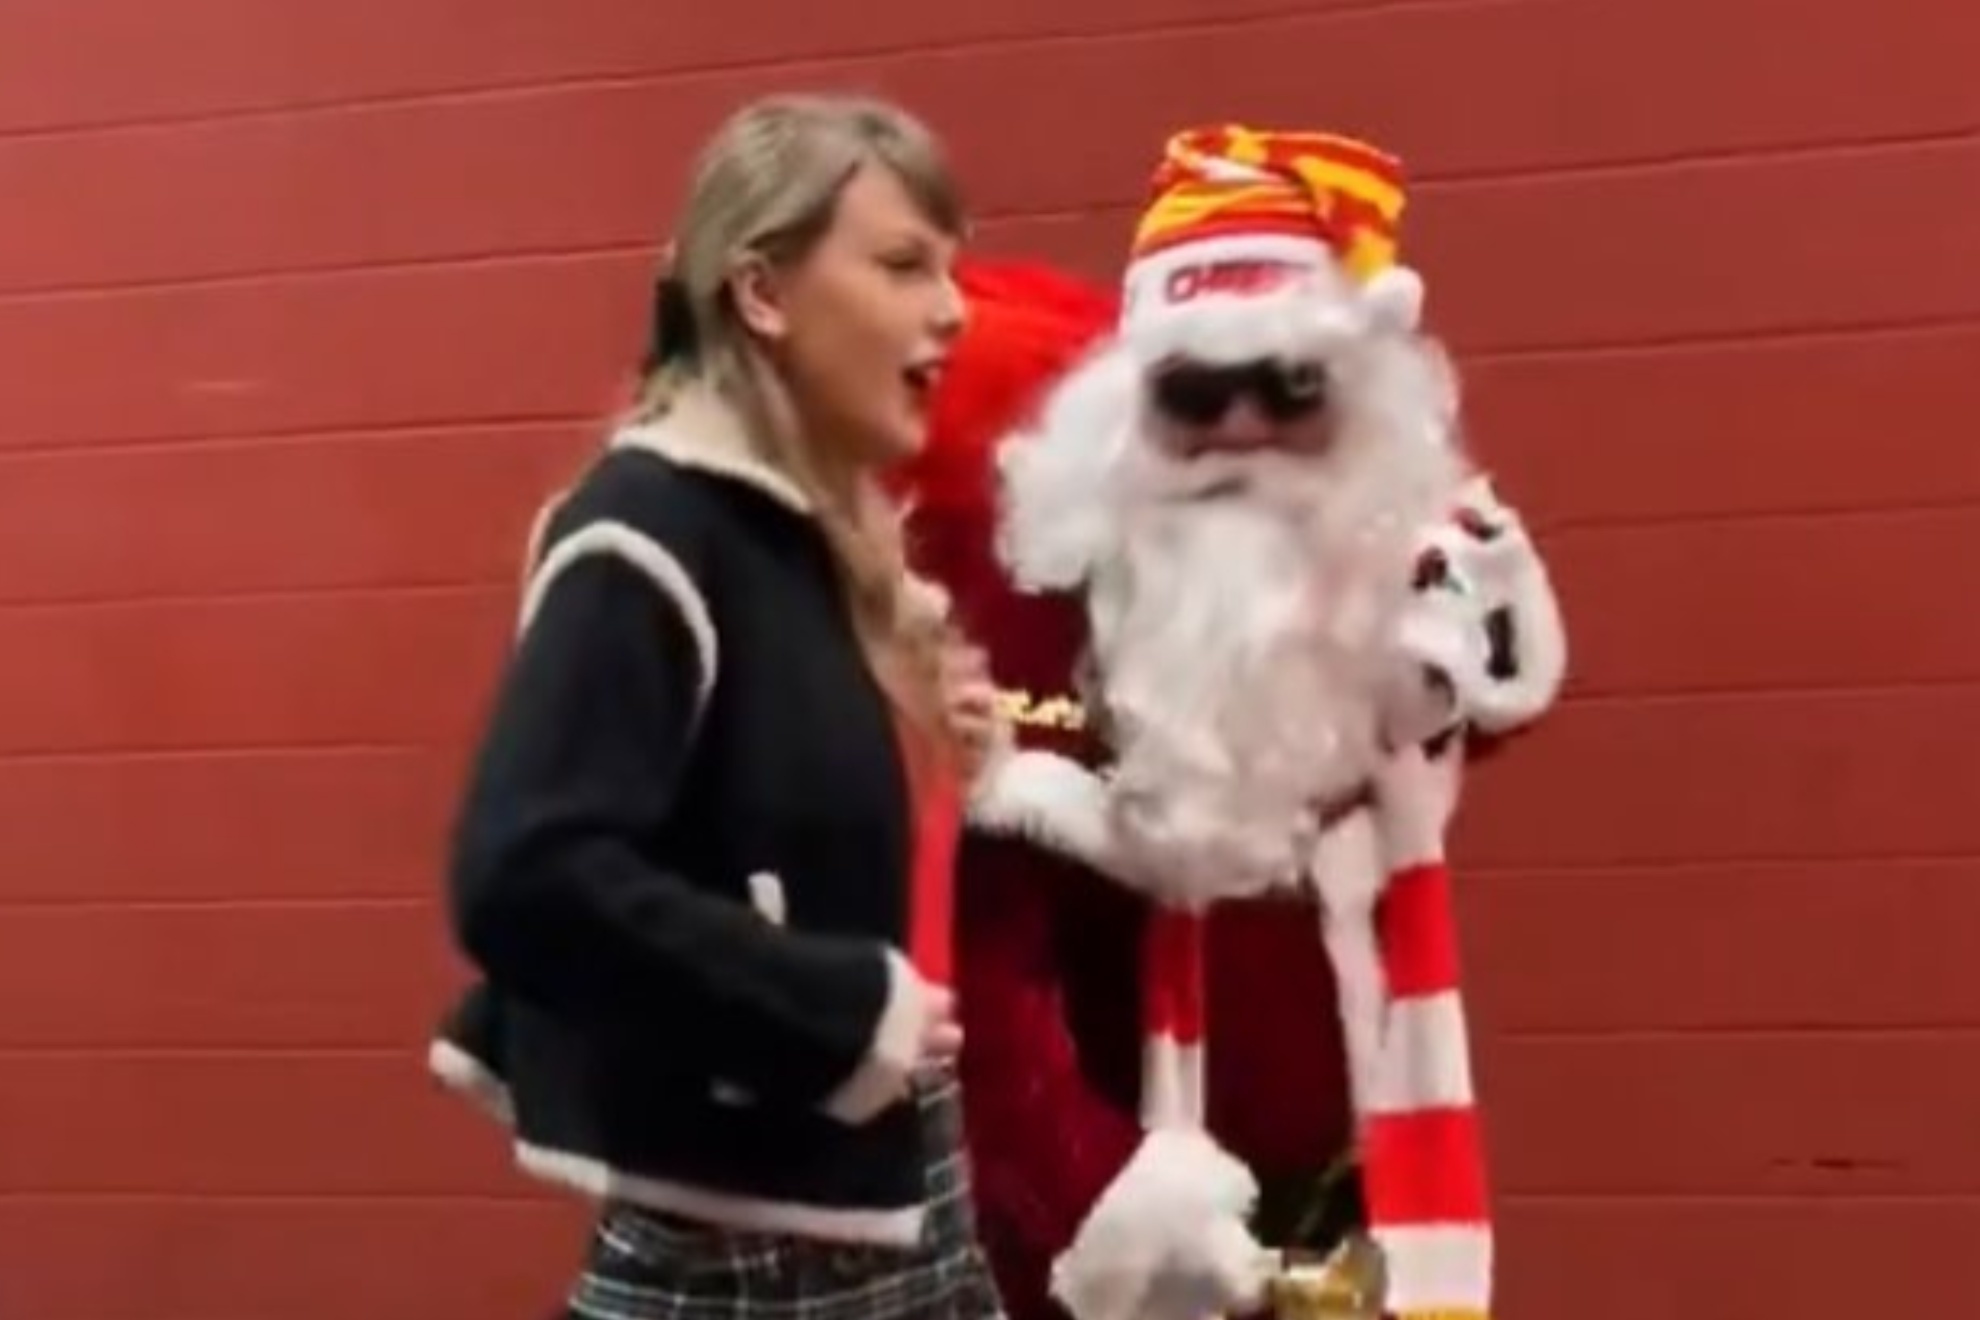 Taylor Swift arrived to Arrowhead Stadium with Santa Claus